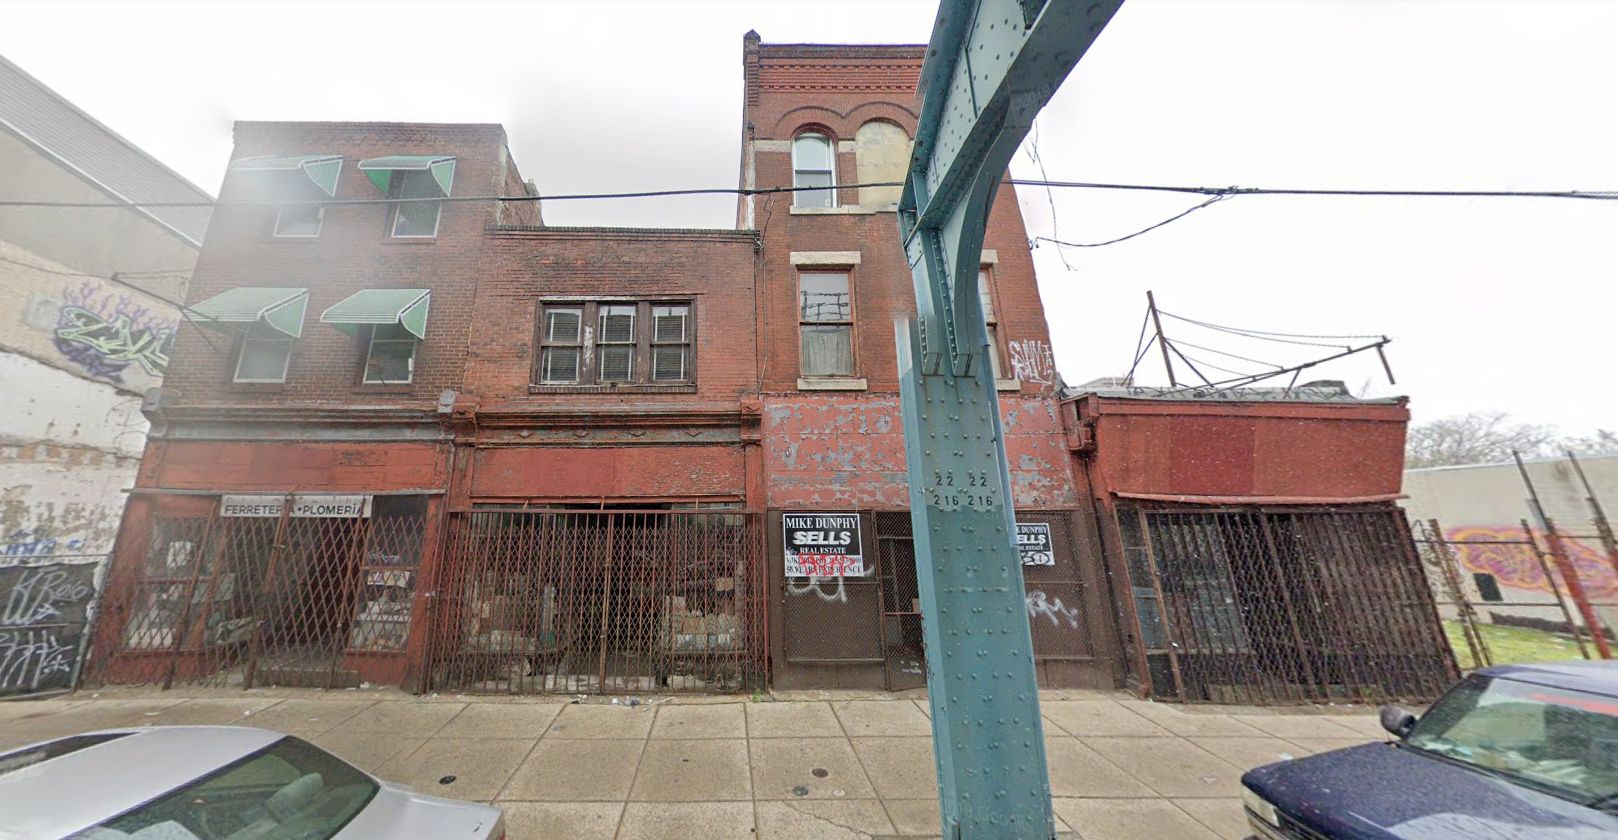 Future site of The Emerald at 2214 North Front Street, prior to demolition. Looking west. November 2019. Credit: Google Maps